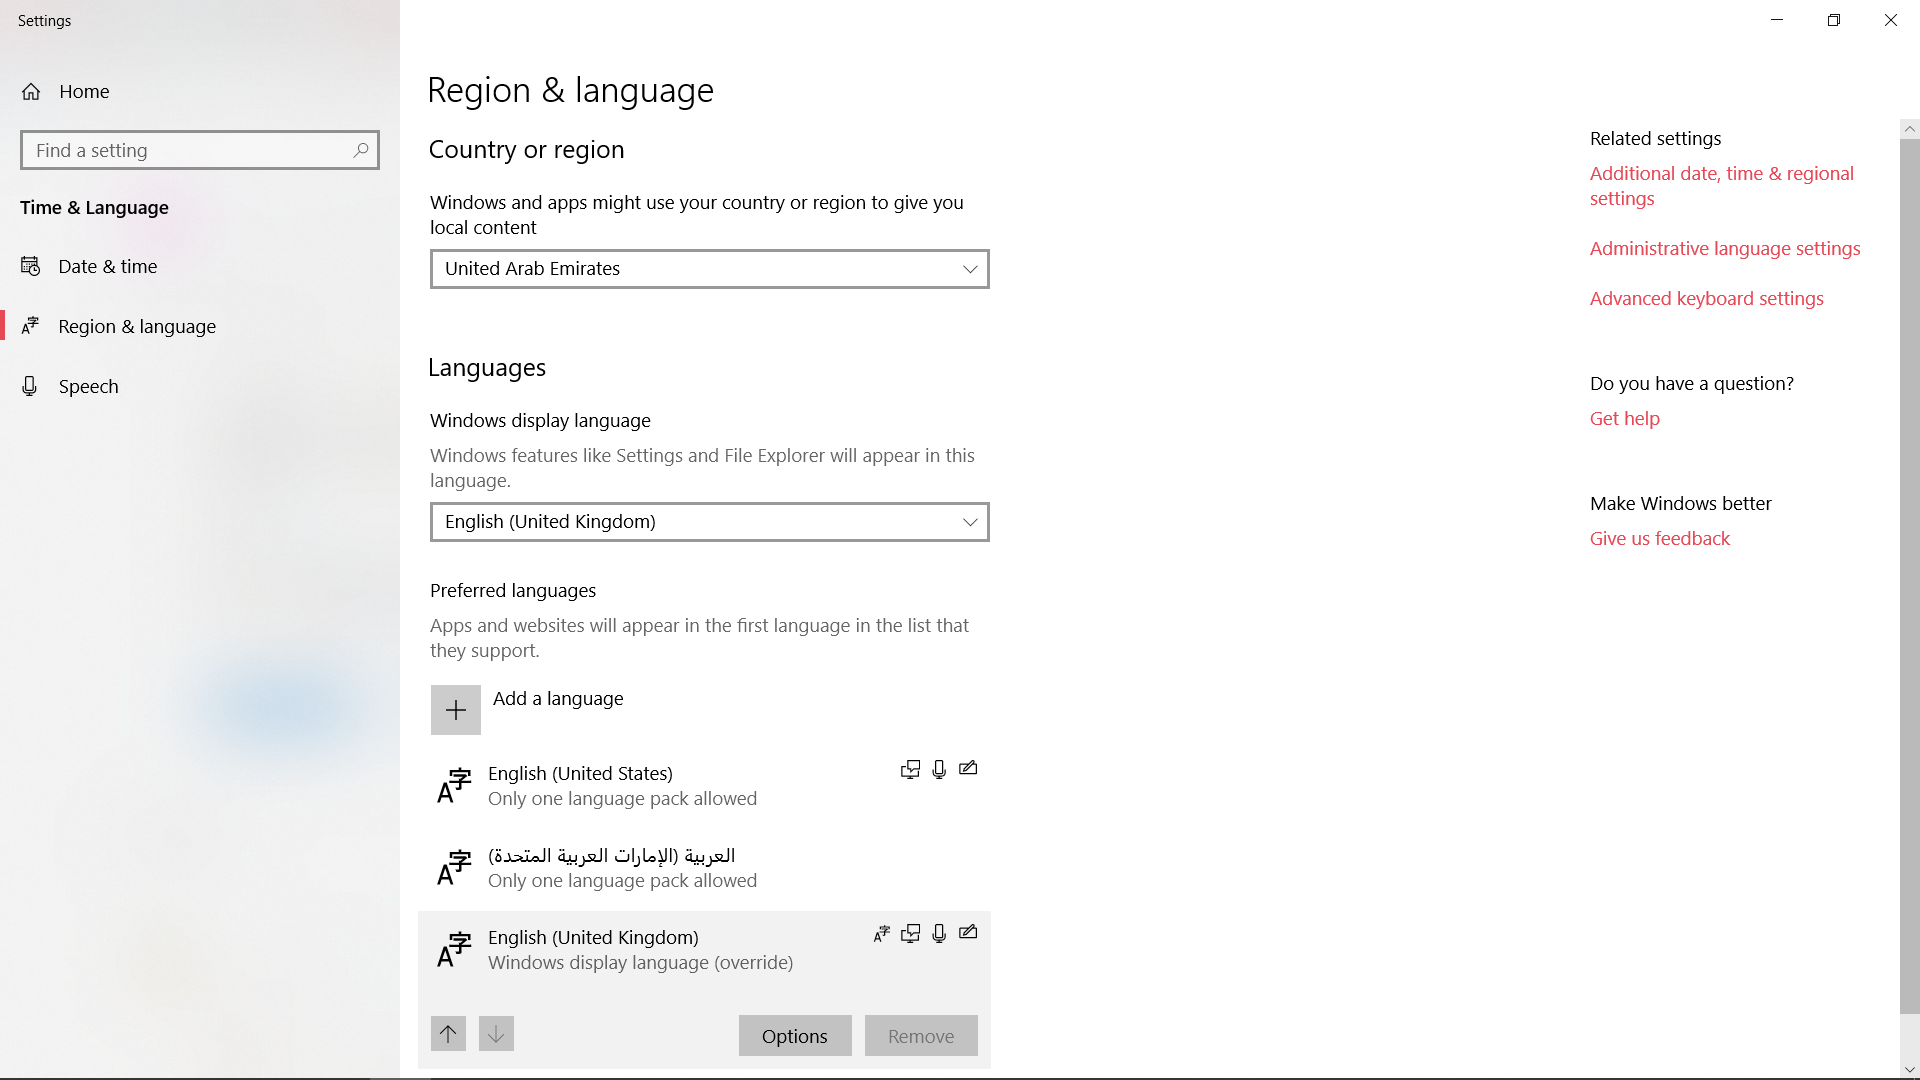 Cannot Change Windows Display Language Settings And Cannot Remove Microsoft Community